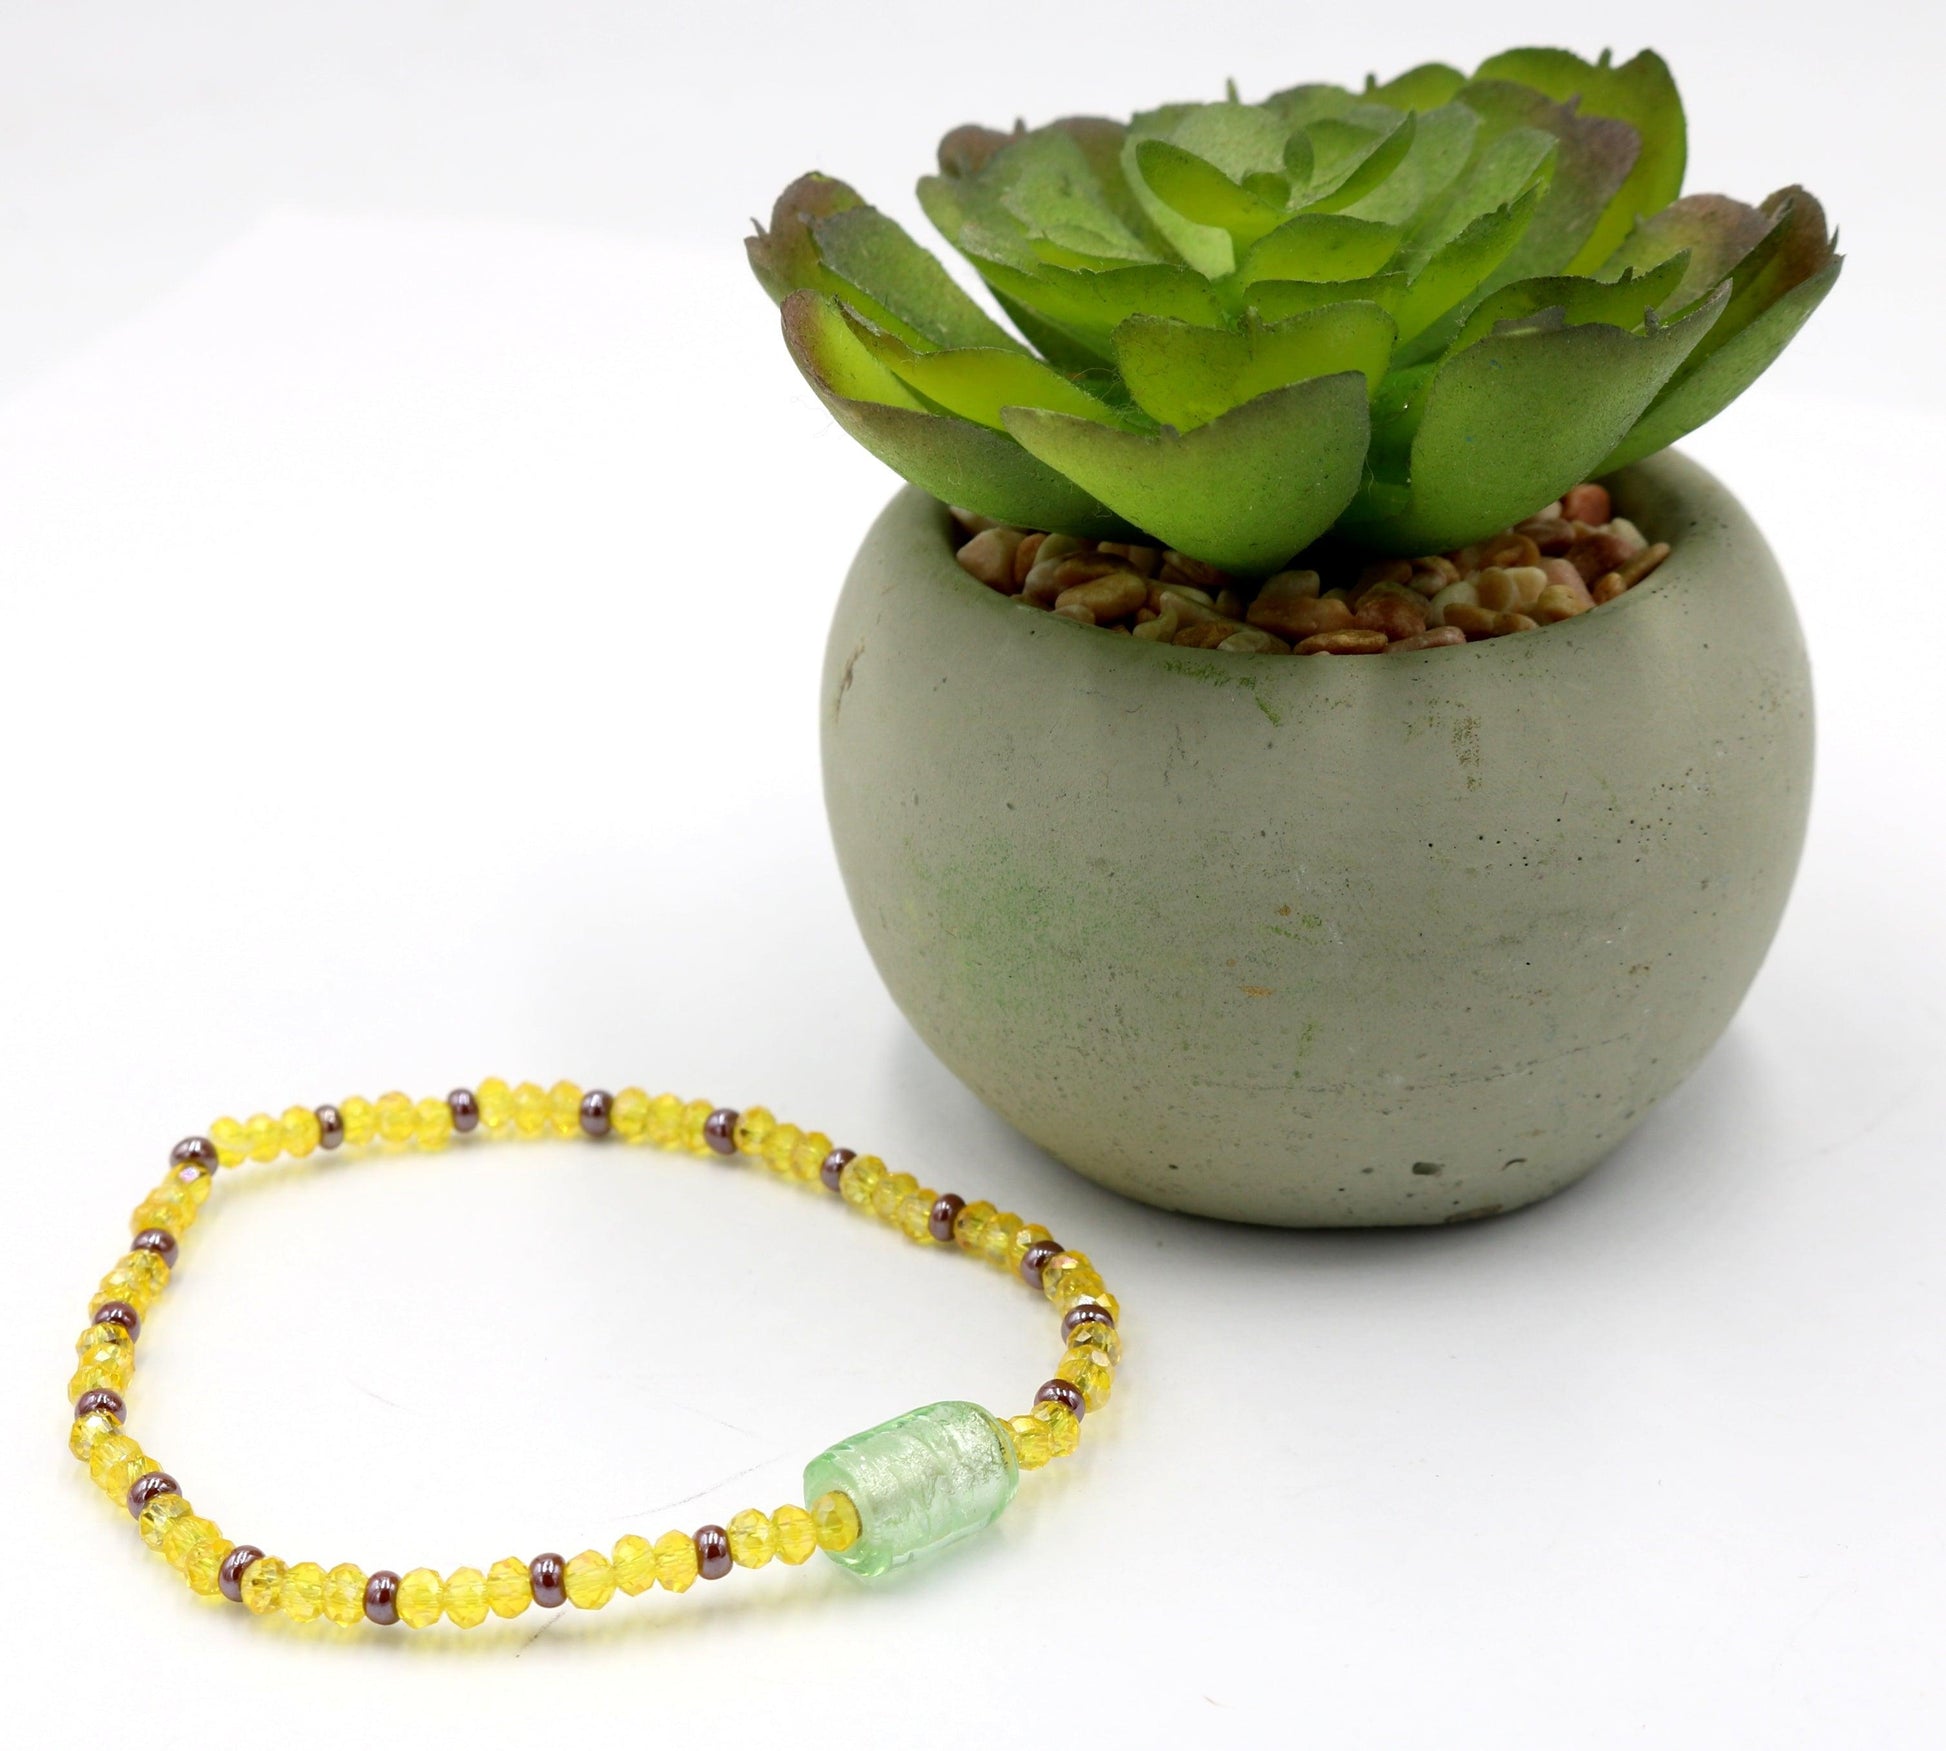 Frosty Light Mint Green Faceted Yellow Glass Beads with Brown Seed Glass Seed Bead Fun Boho Stretch Stack Bracelet Women’s Gift 2022 - Monkeysmojo